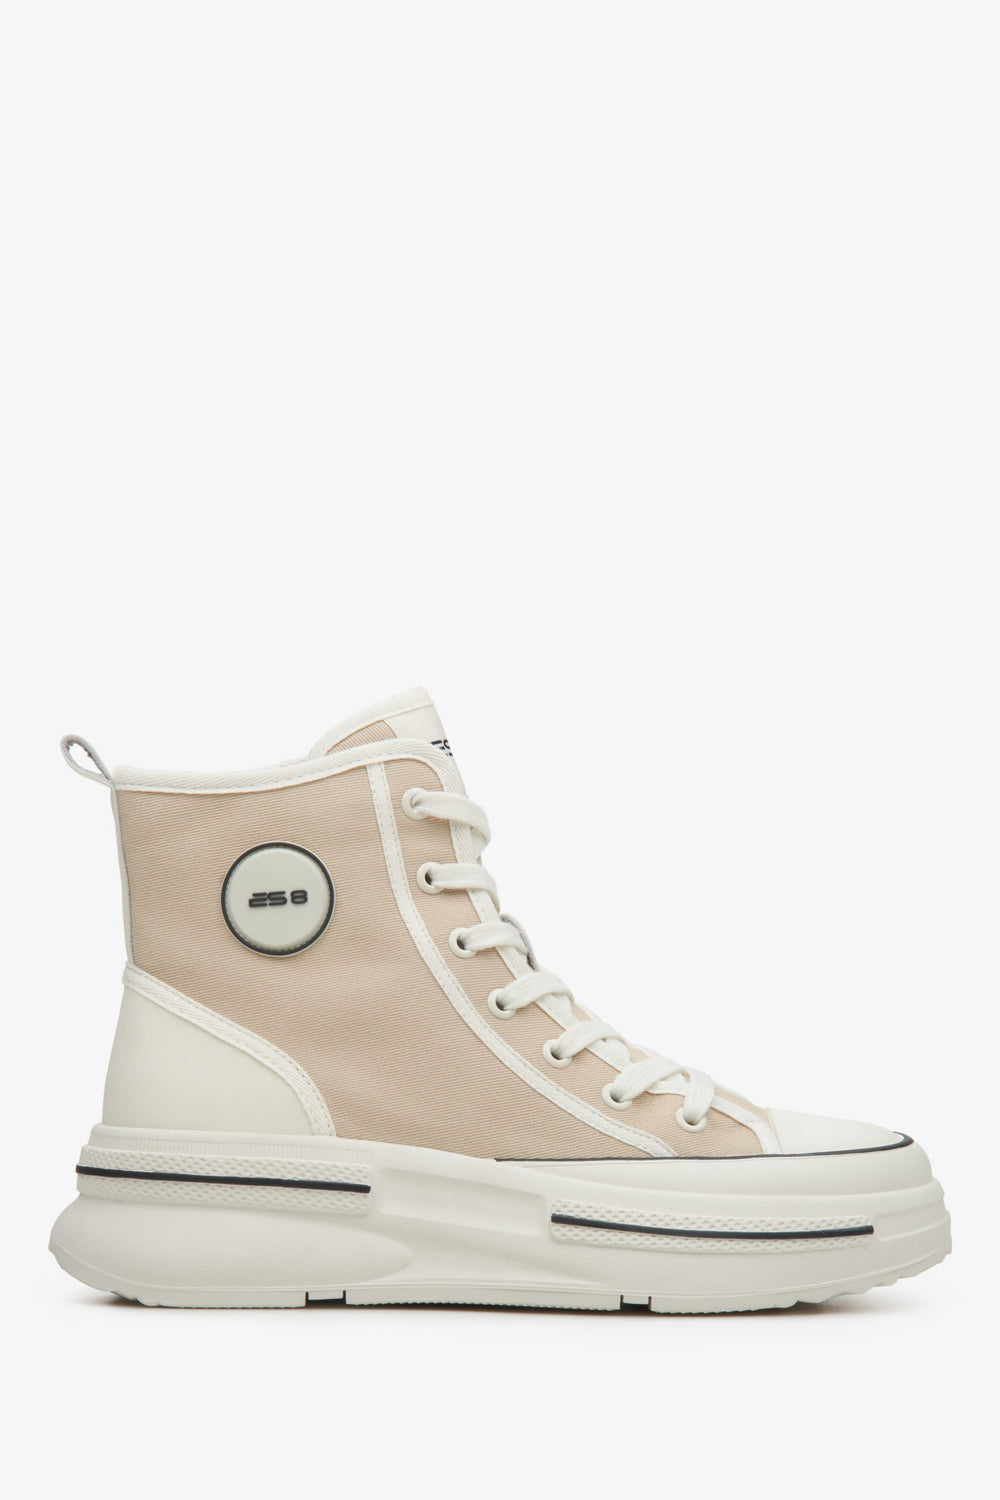 Women's Beige High-Top Sneakers made of Soft Textiles ES 8 ER00114604.